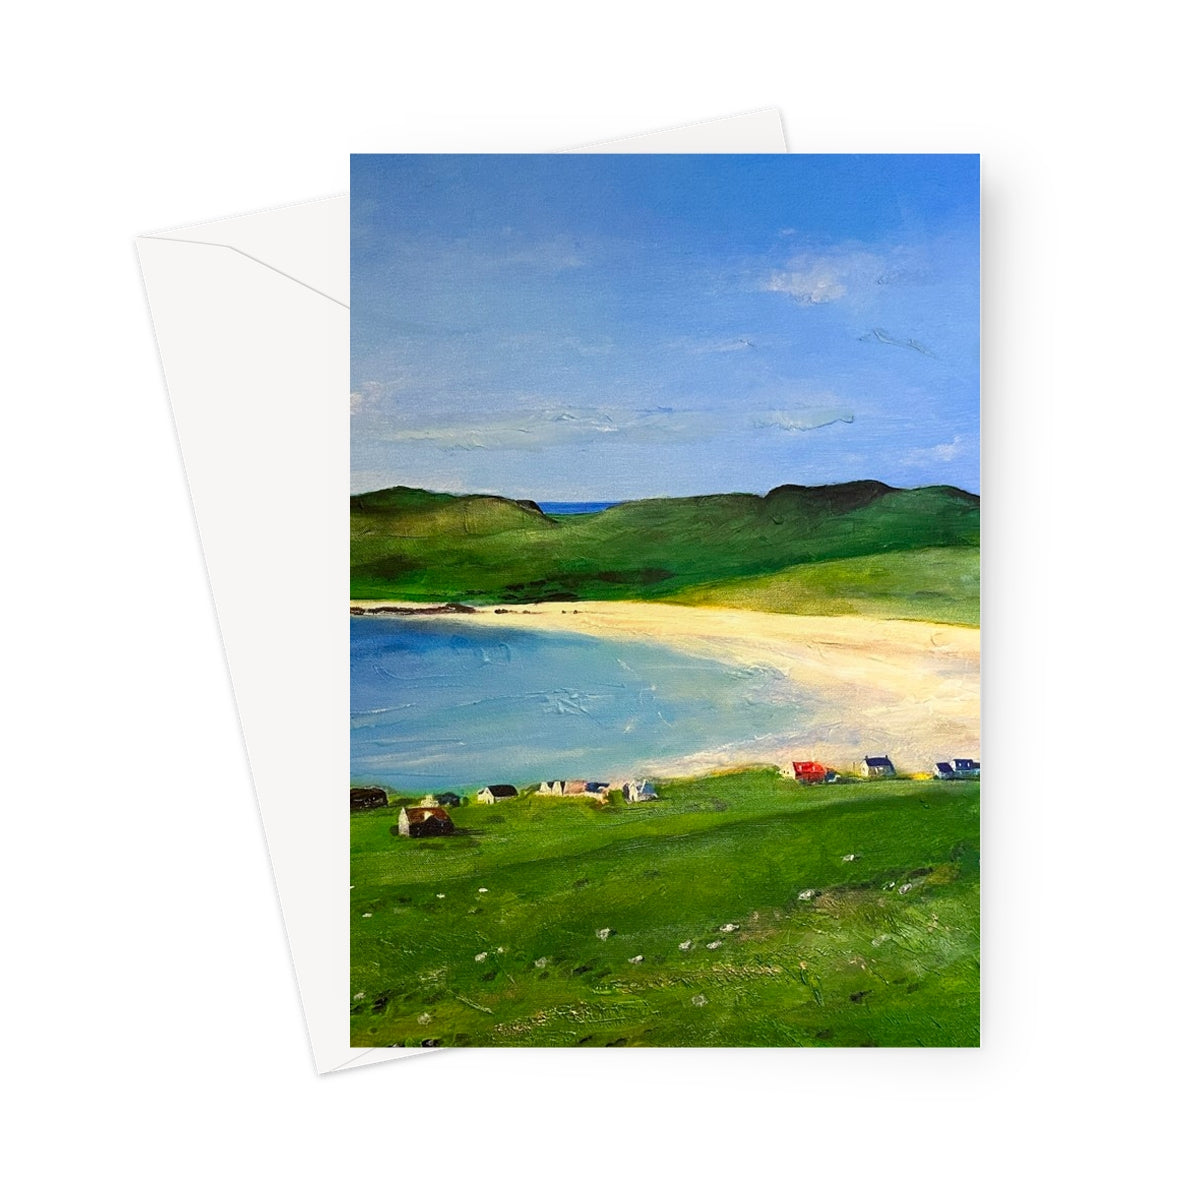 Balephuil Beach Tiree Art Gifts Greeting Card-Greetings Cards-Hebridean Islands Art Gallery-5"x7"-1 Card-Paintings, Prints, Homeware, Art Gifts From Scotland By Scottish Artist Kevin Hunter